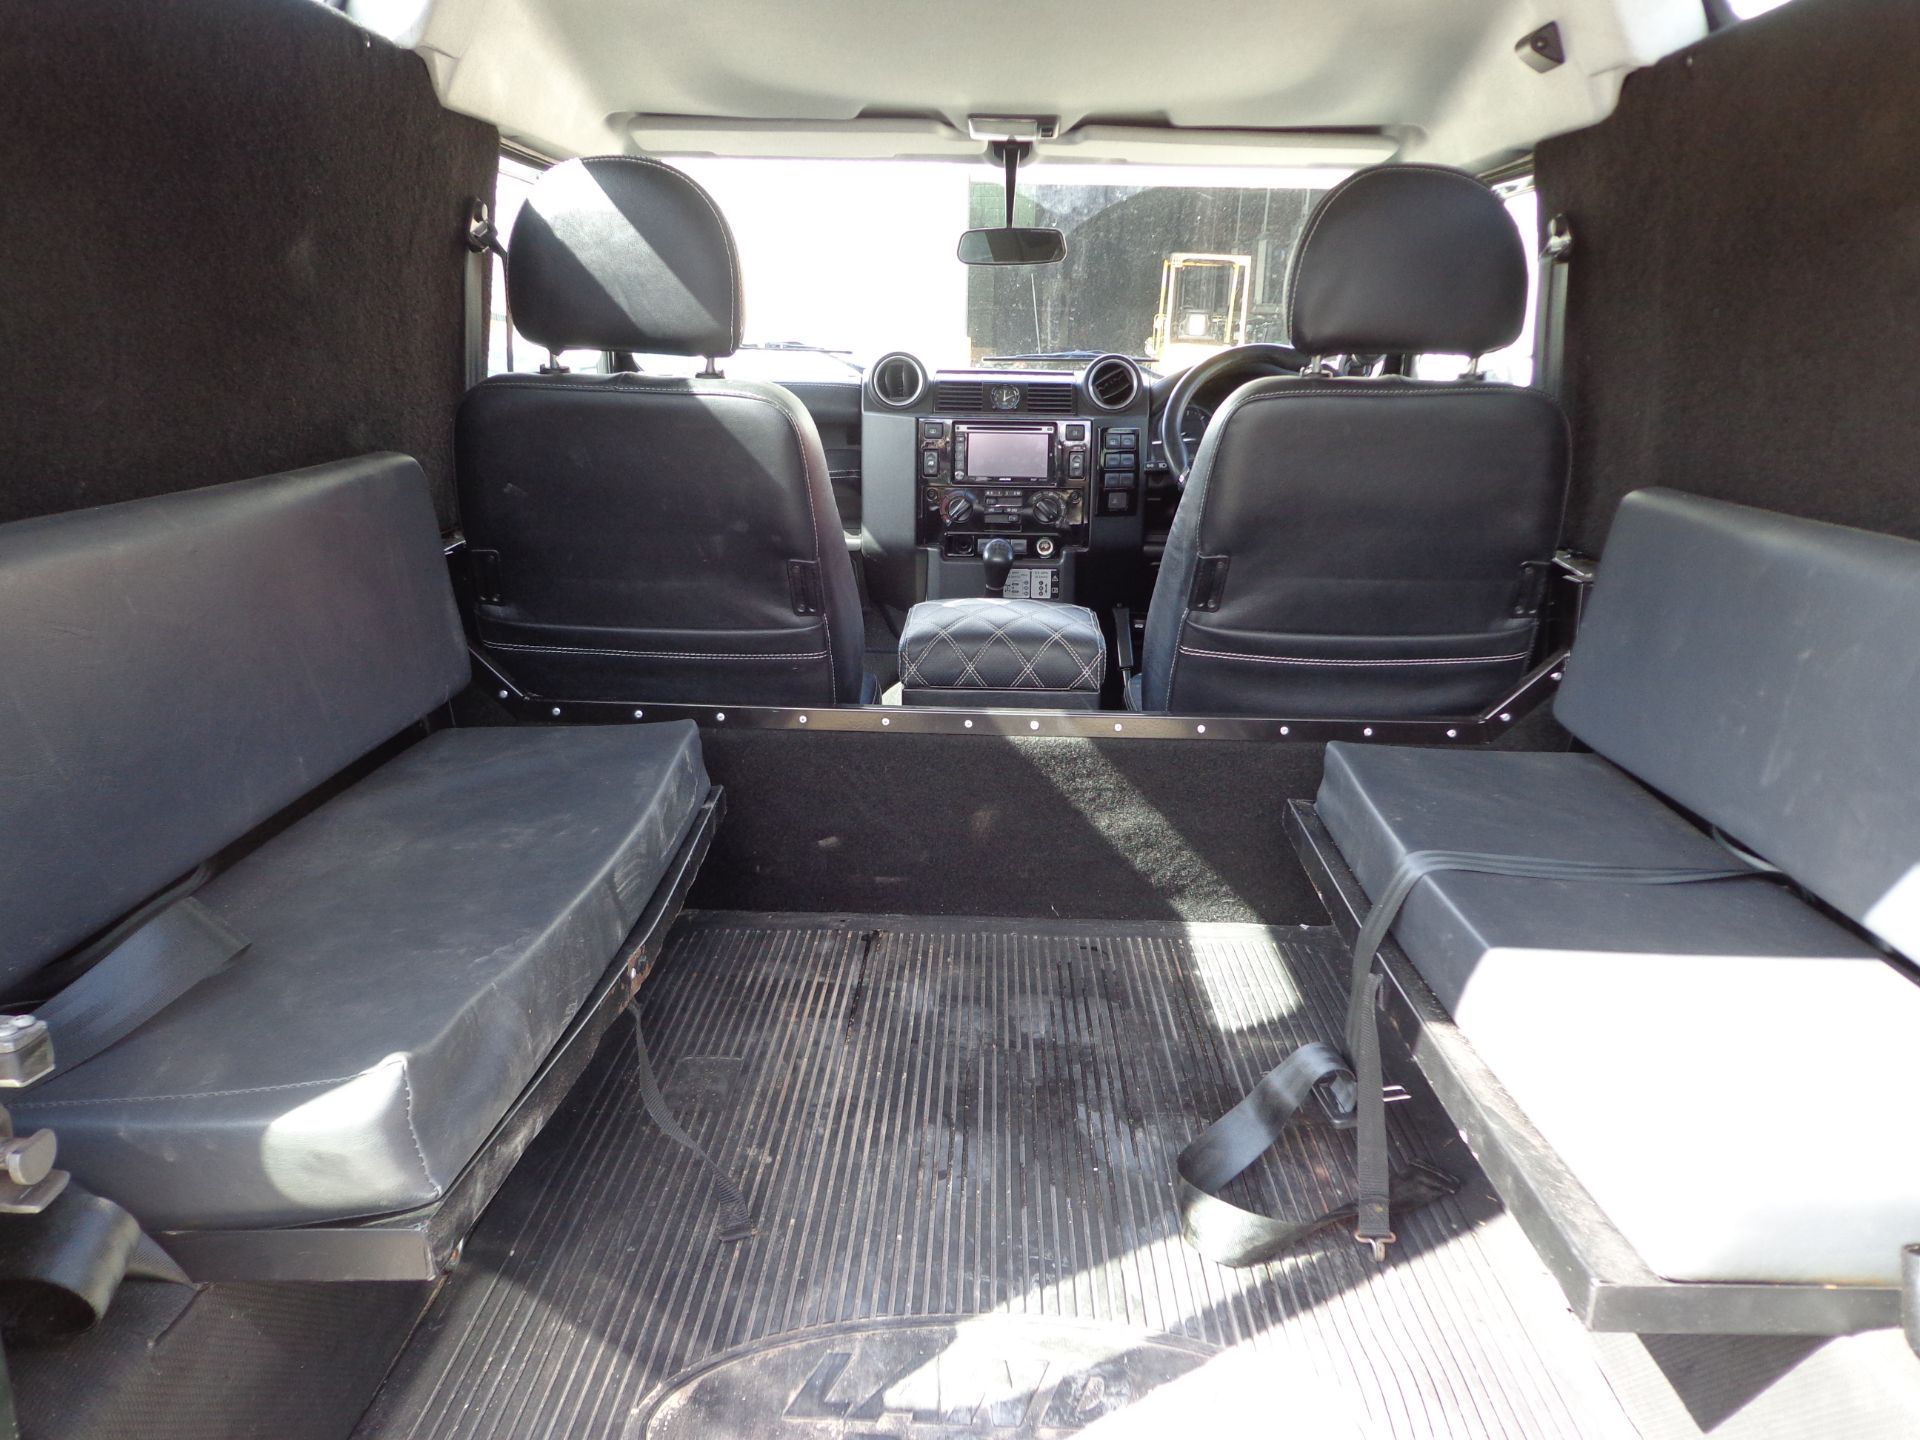 LAND ROVER Defender 90 County Hard Top c/w External Roll Cage, Brown Leather Seating, Reg. - Bild 10 aus 10